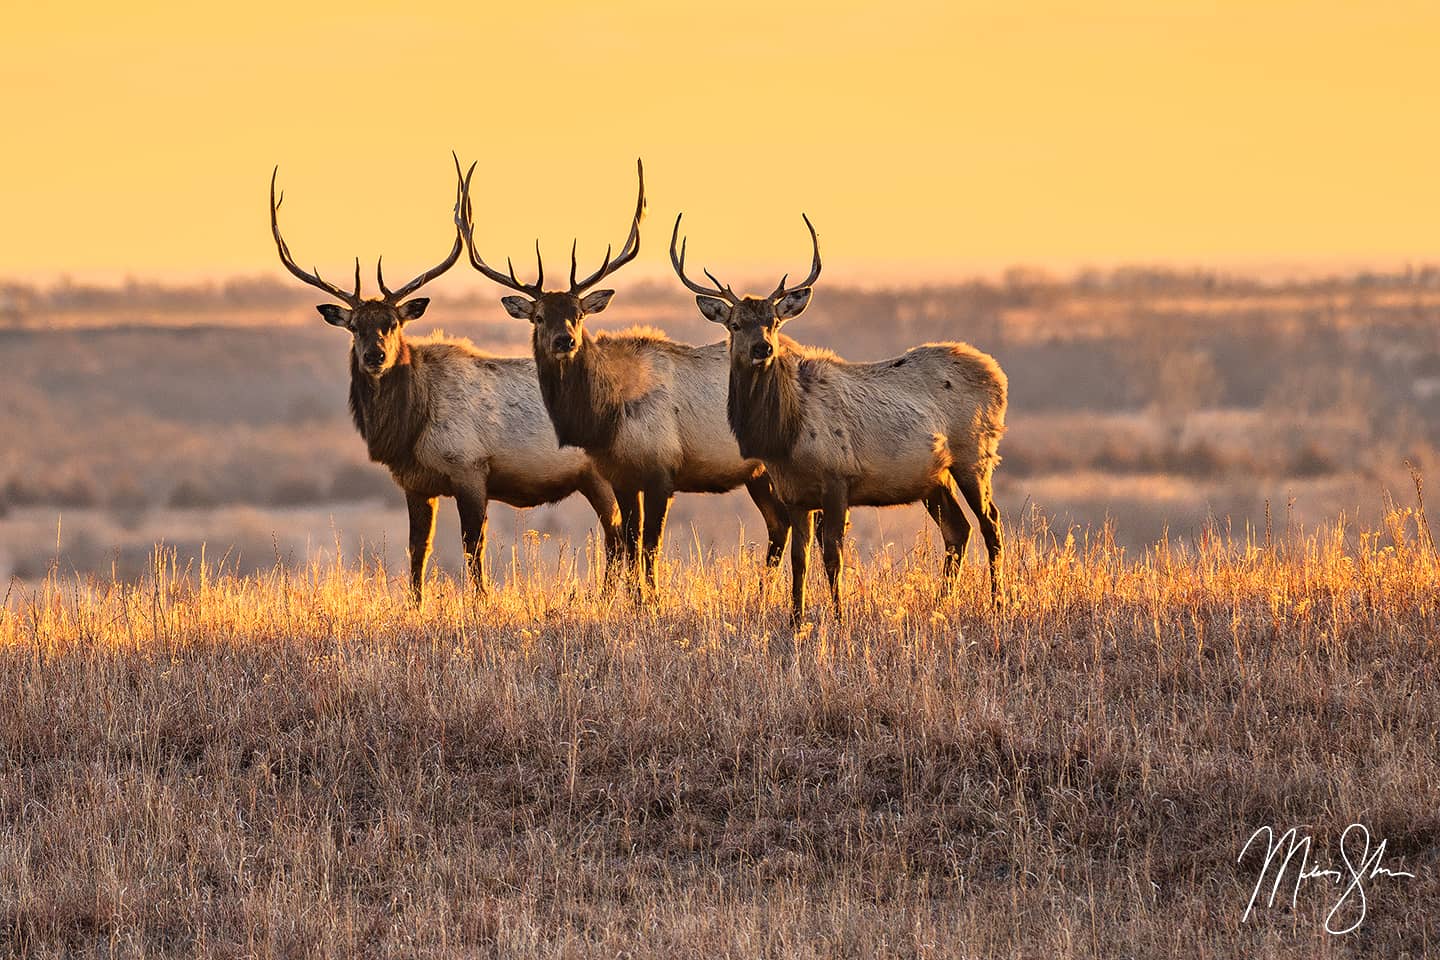 Three bull elks line up perfectly at the top of the hill as light from the sunrise casts a warm glow not only on the elk but the grasses of the edge of the Flint Hills at Maxwell Wildlife Refuge. This was actually my first real attempt at any kind of wildlife photography in my career, and I have to say, I am pretty happy with the results. I mean, how often do you get lucky enough to get three big bulls looking in the same direction nearly spaced out perfectly.